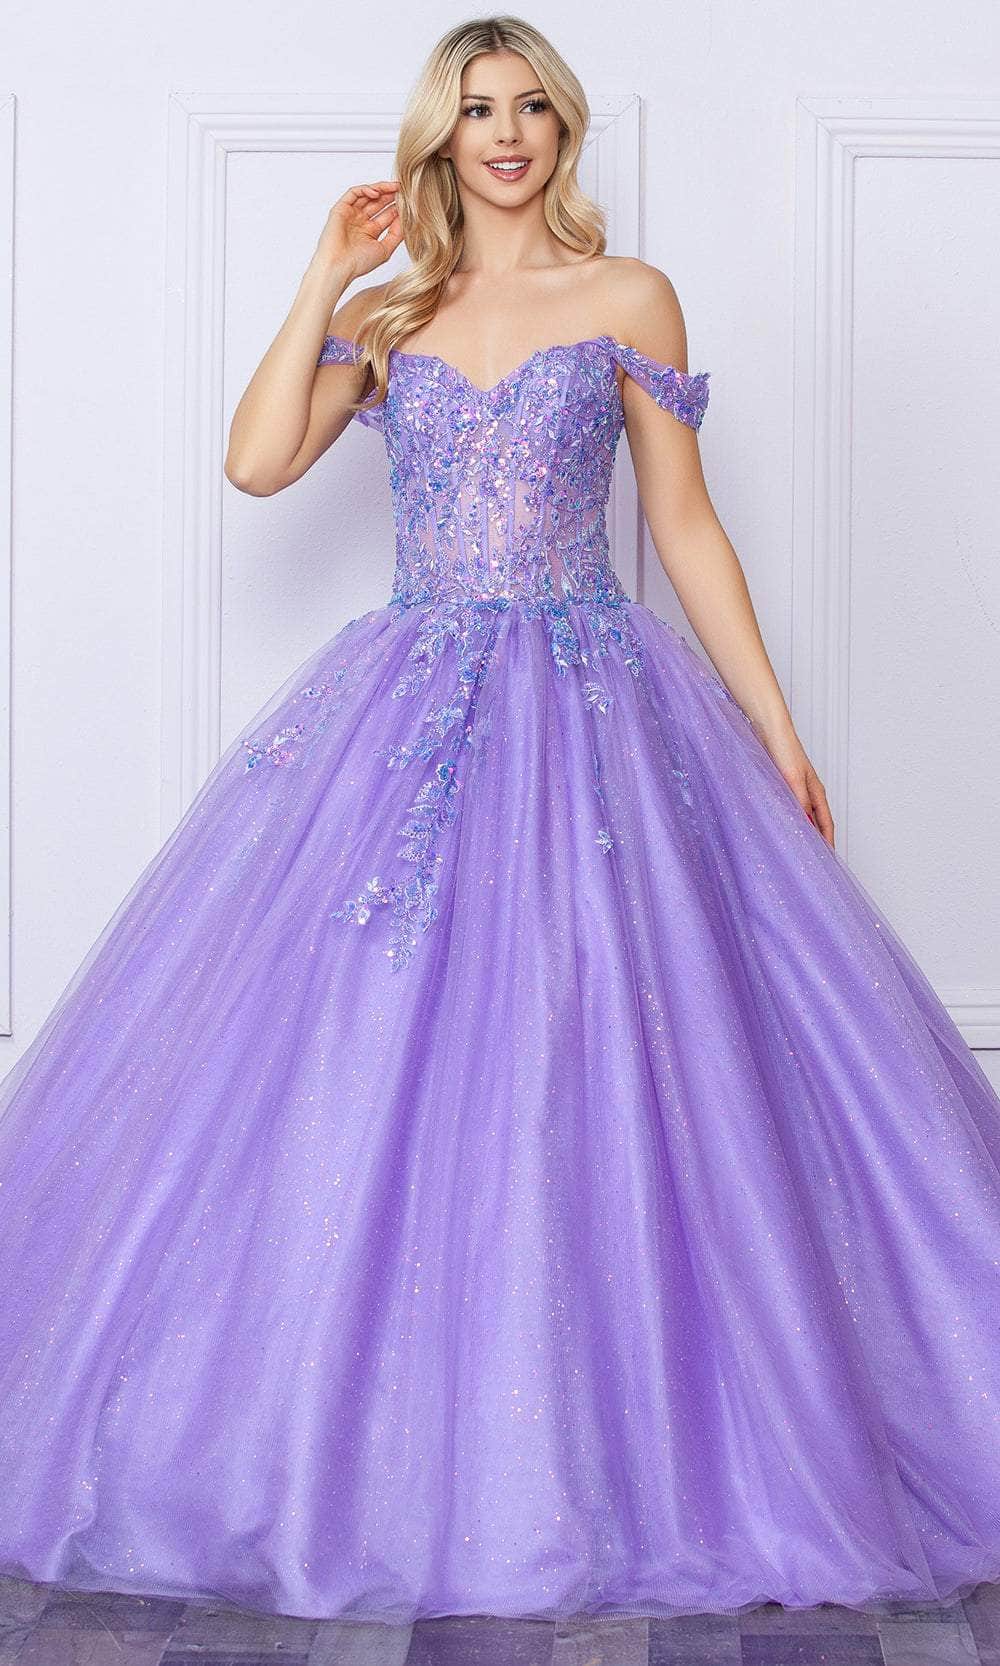 Nox Anabel H1349 - Beaded Corset Bodice Ballgown Ball Gowns 4 / Lavender